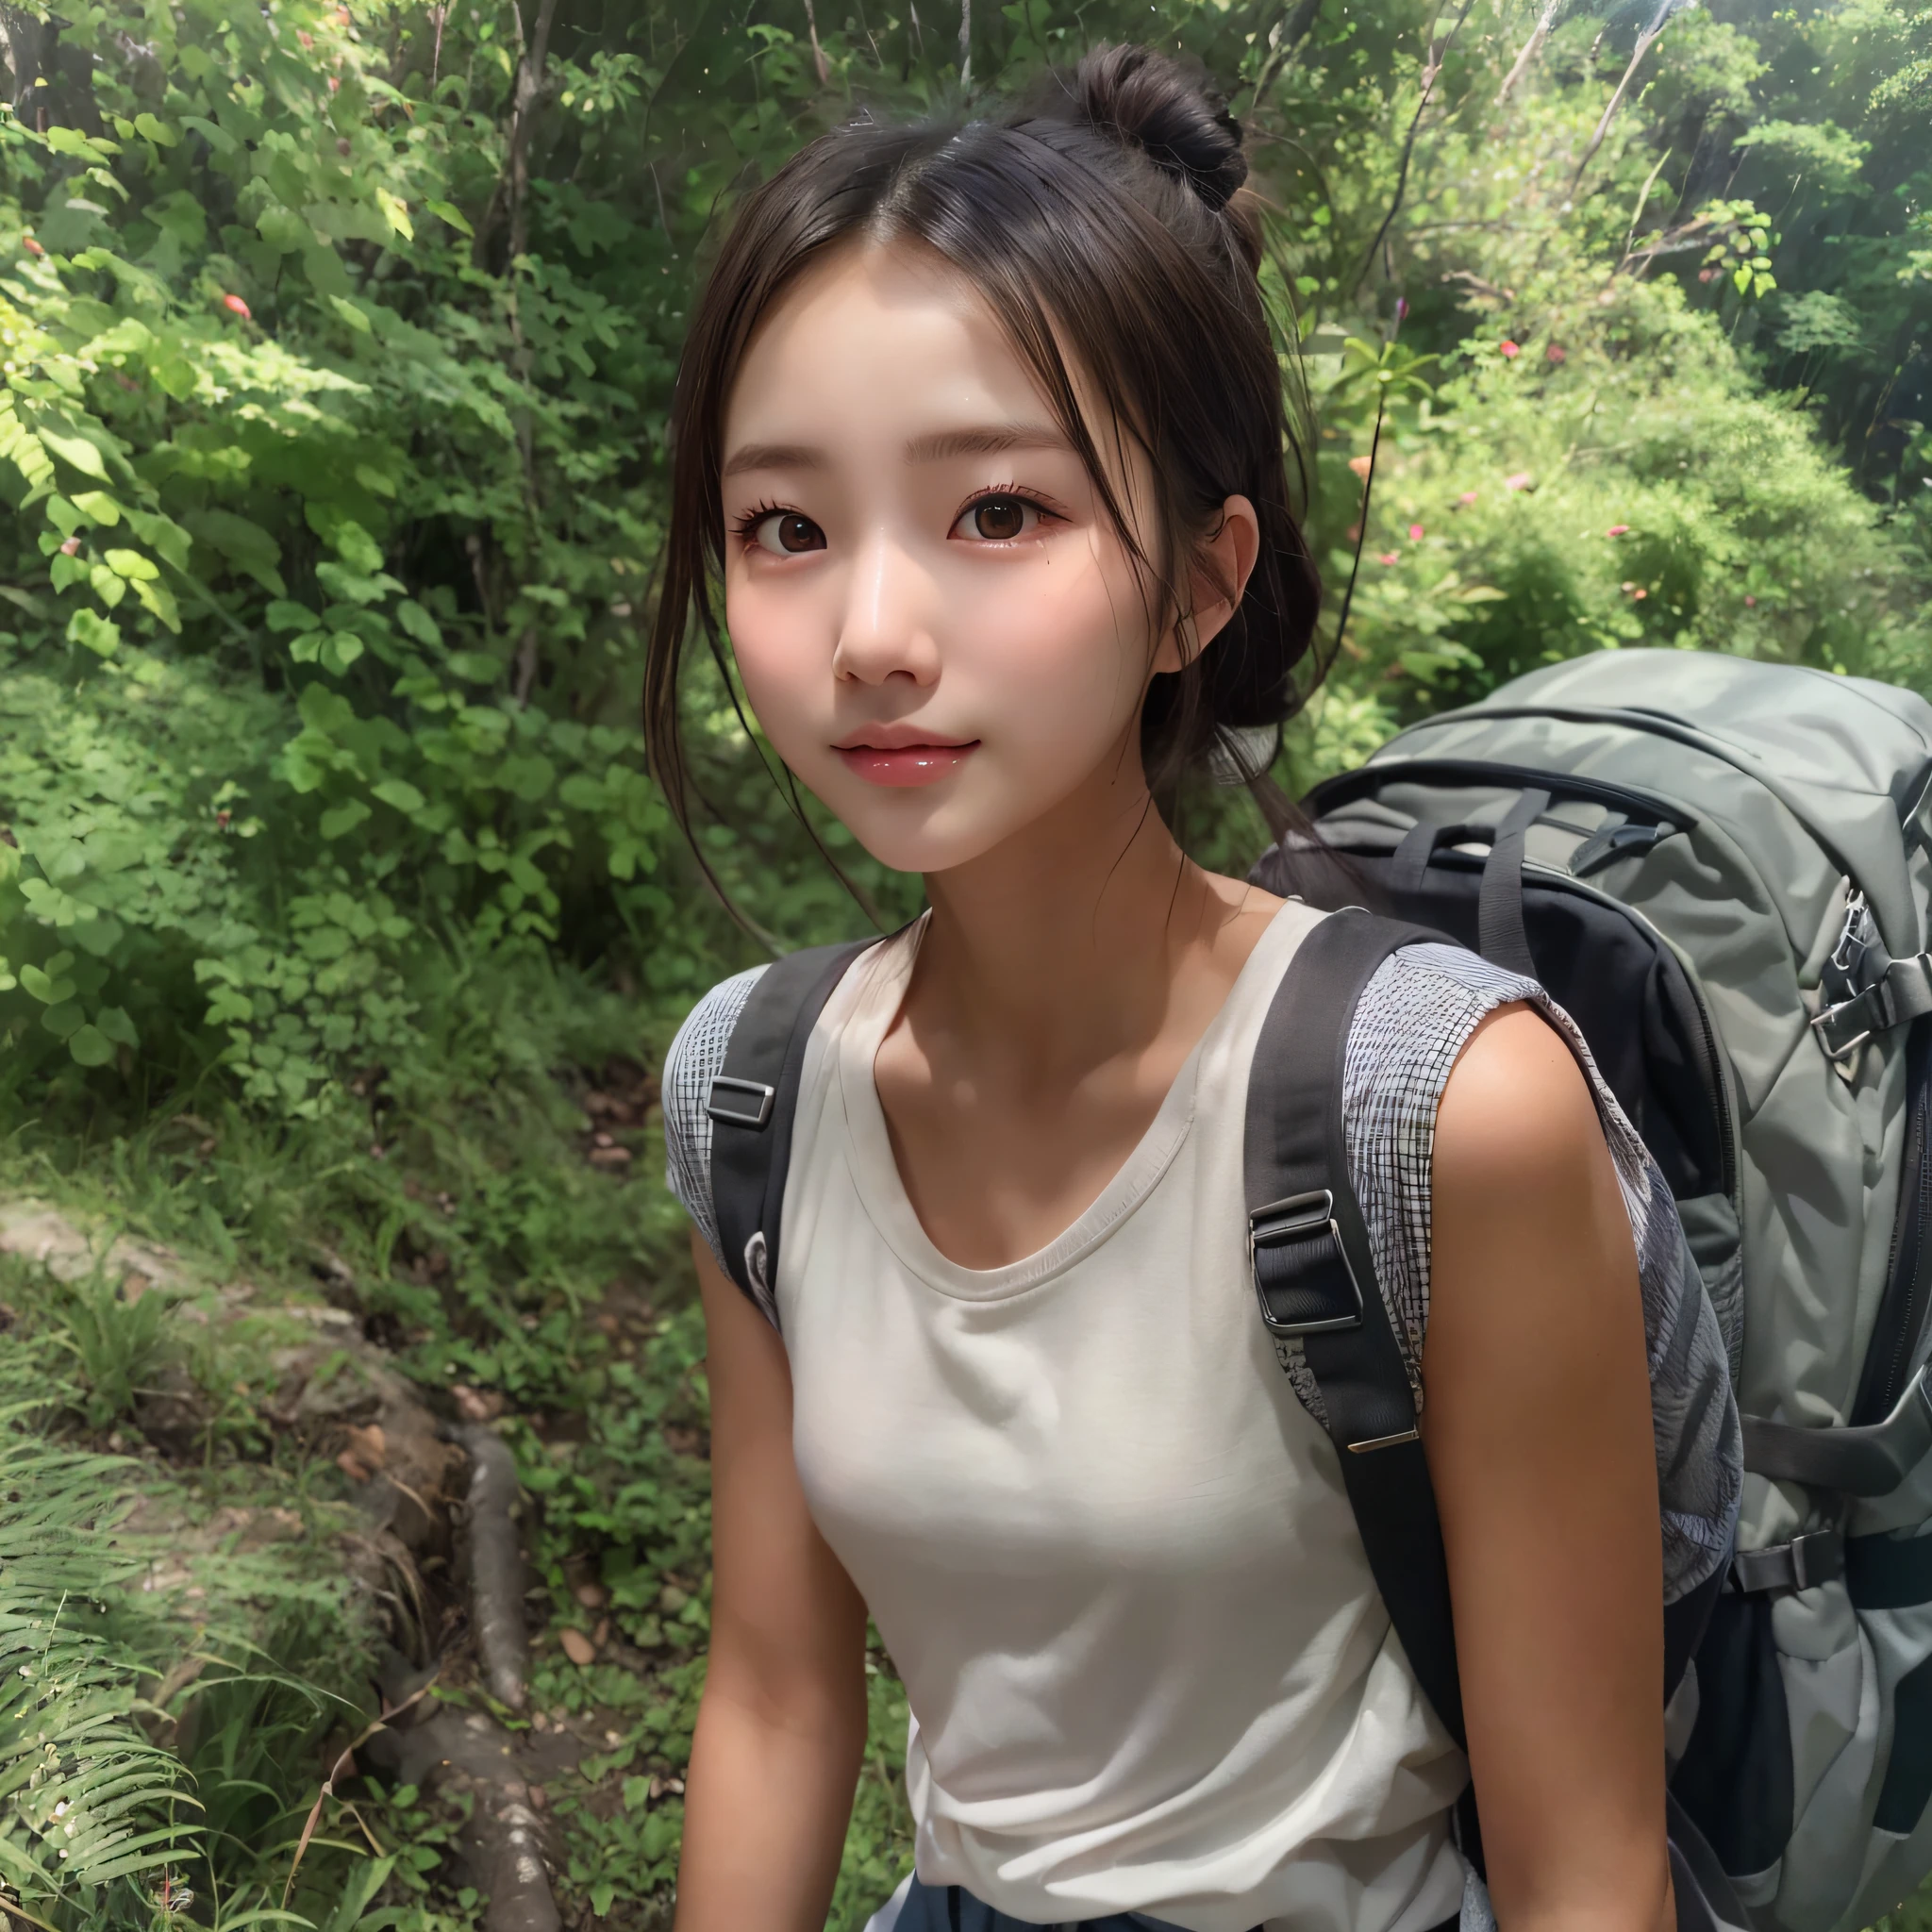 Naturescape photography; mountain climbing; (1girl:1.3), (slender body), (Wearing a white T-shirt loose, Wearing a gingham check shirt, Black nylon fabric shorts), (Bun hair), (dark-brown hair), (asian girl, 18 years old, ultra delicate face, ultra Beautiful fece, ultra delicate eyes, ultra detailed nose, ultra detailed mouth, ultra detailed facial features), (face is shiny:0.8), light smile, Carrying a backpack, Body like a model